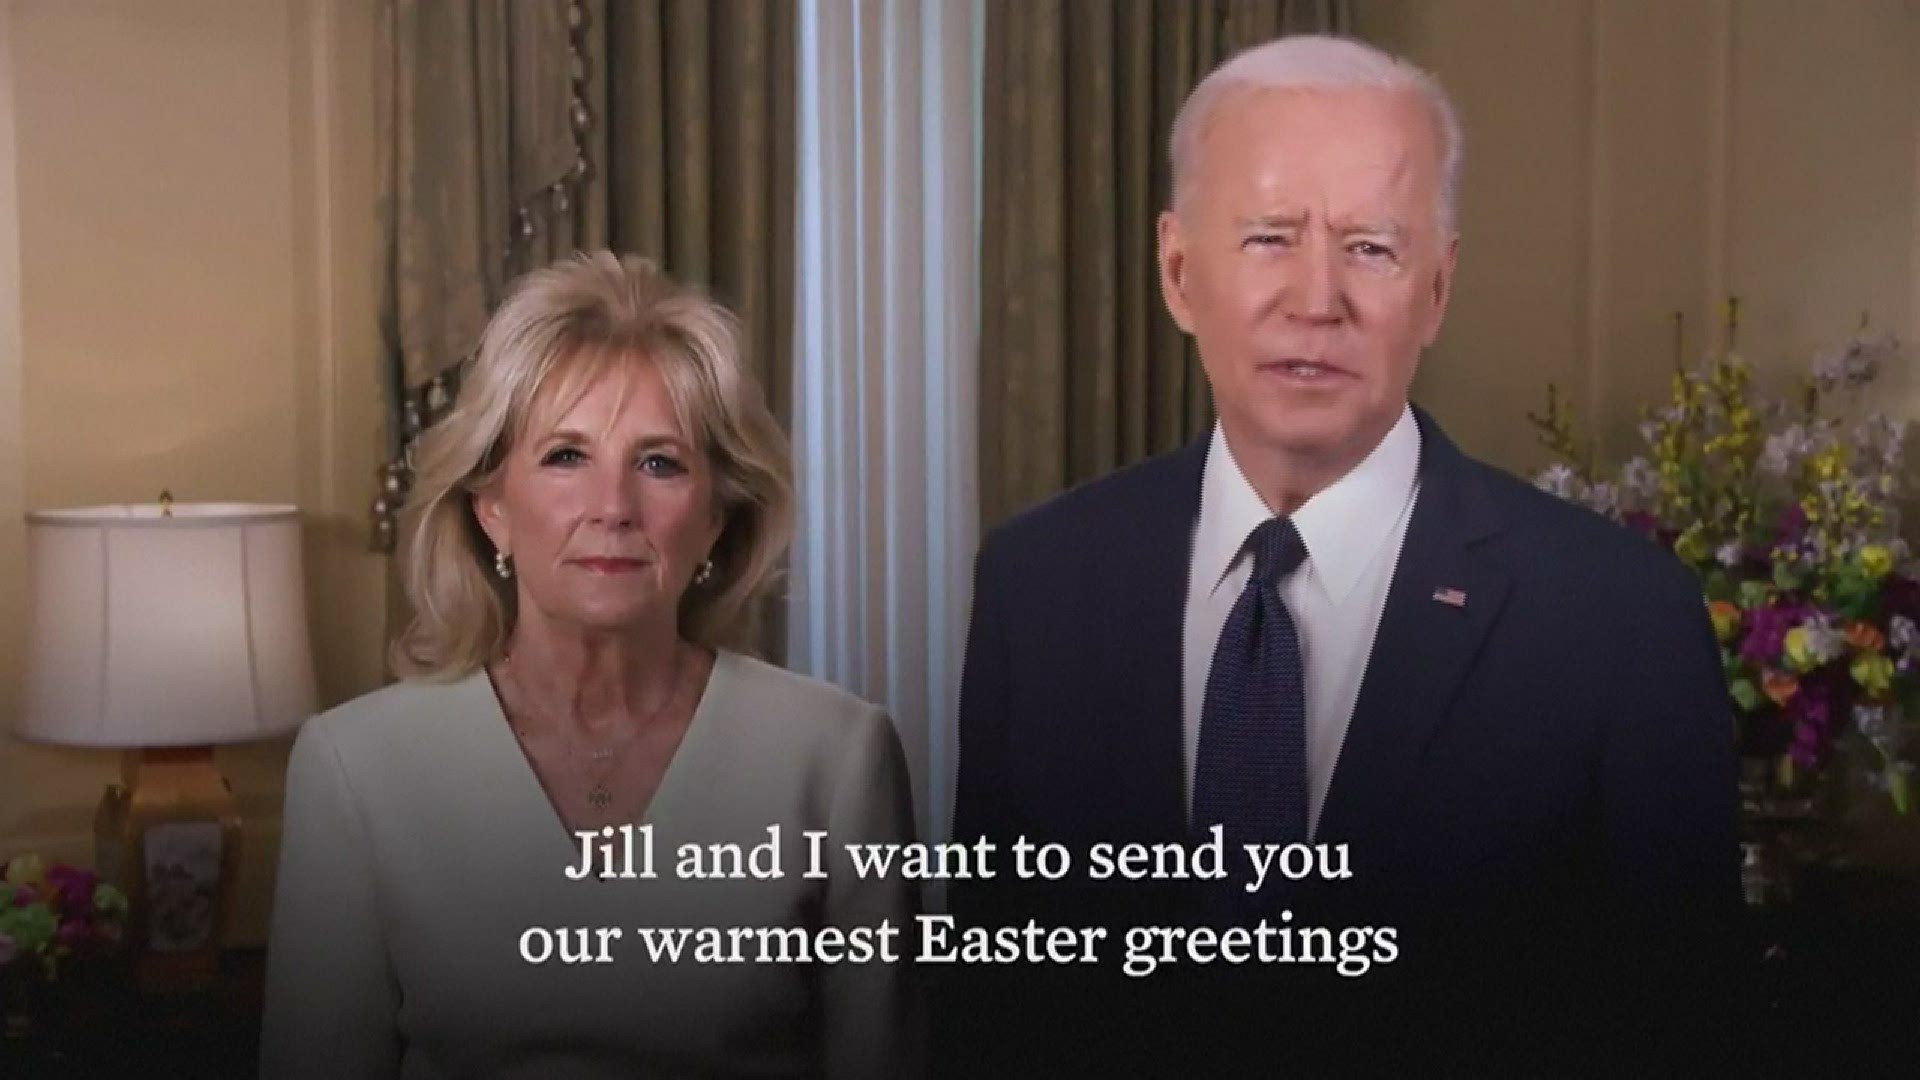 "The light shines in the darkness and the darkness has not overcome it," President Joe Biden said in his Easter message.